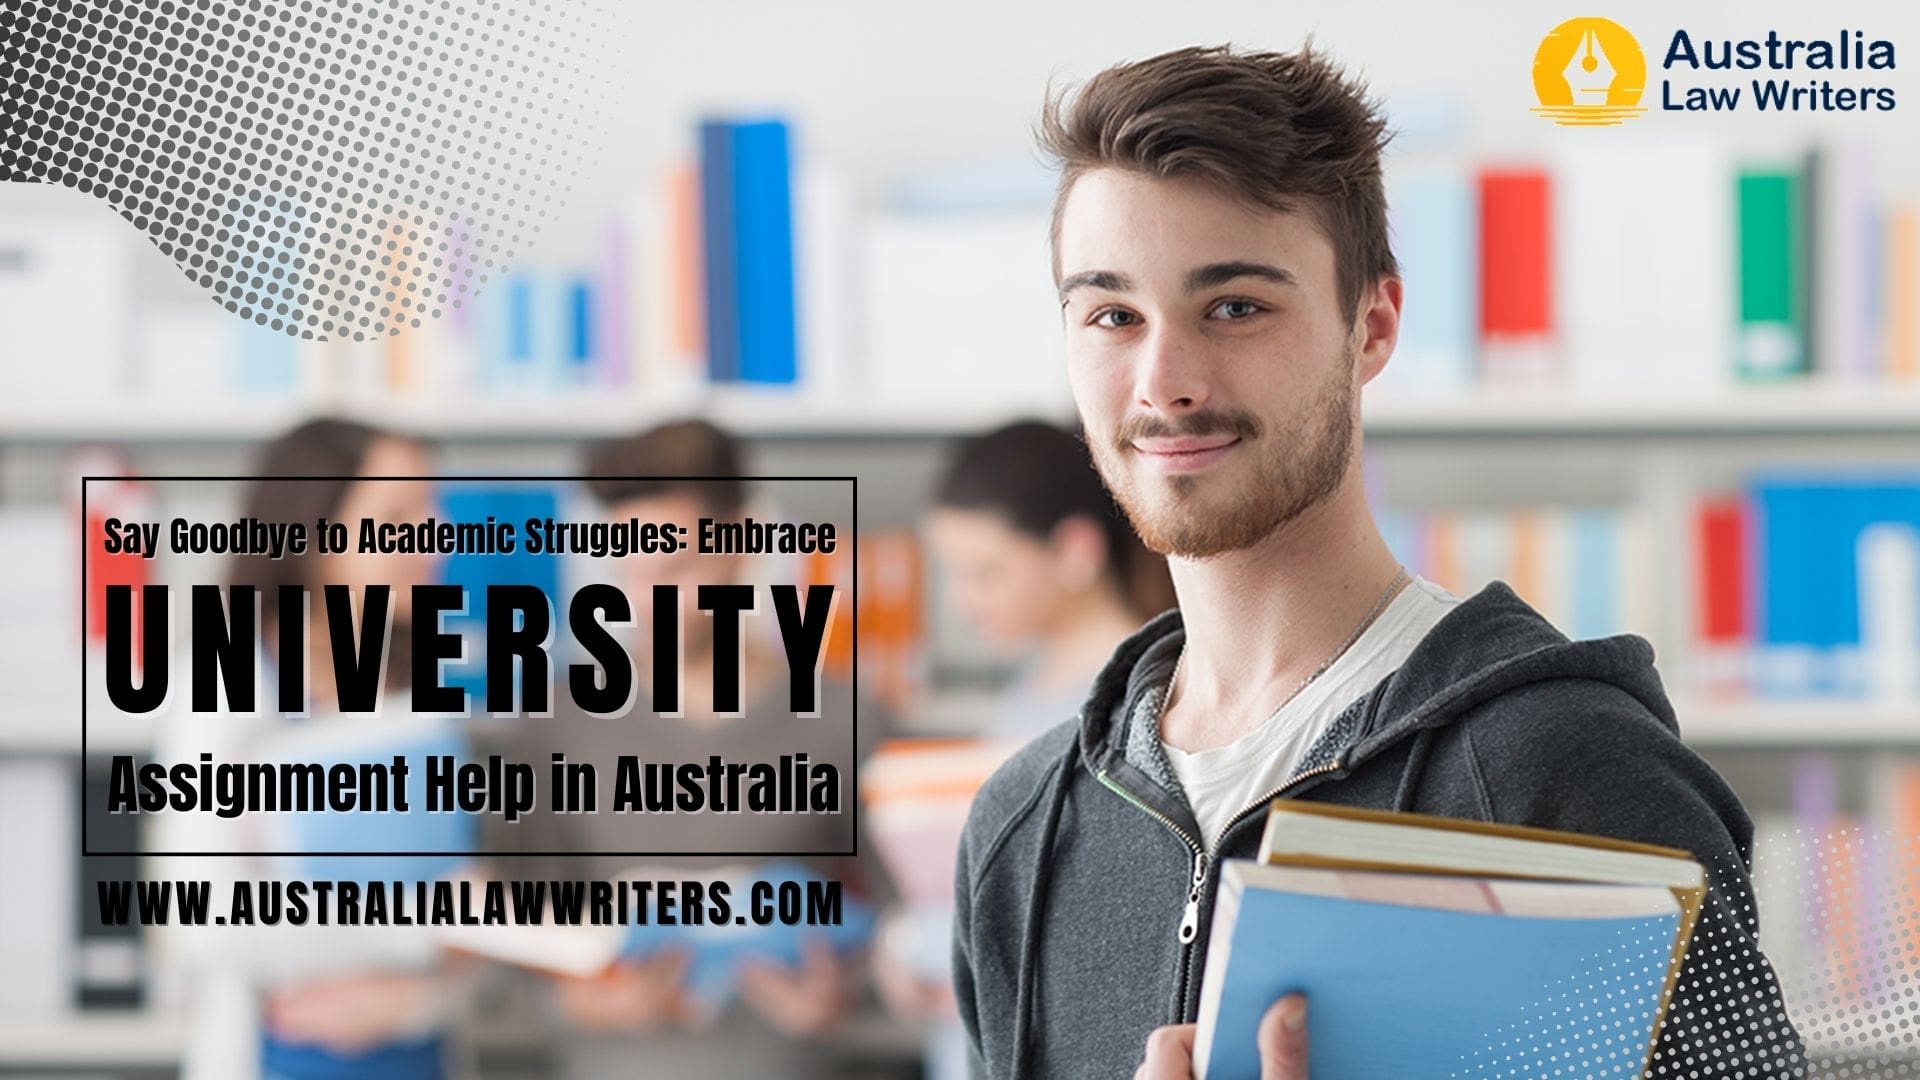 Say Goodbye to Academic Struggles: Embrace University Assignment Help in Australia